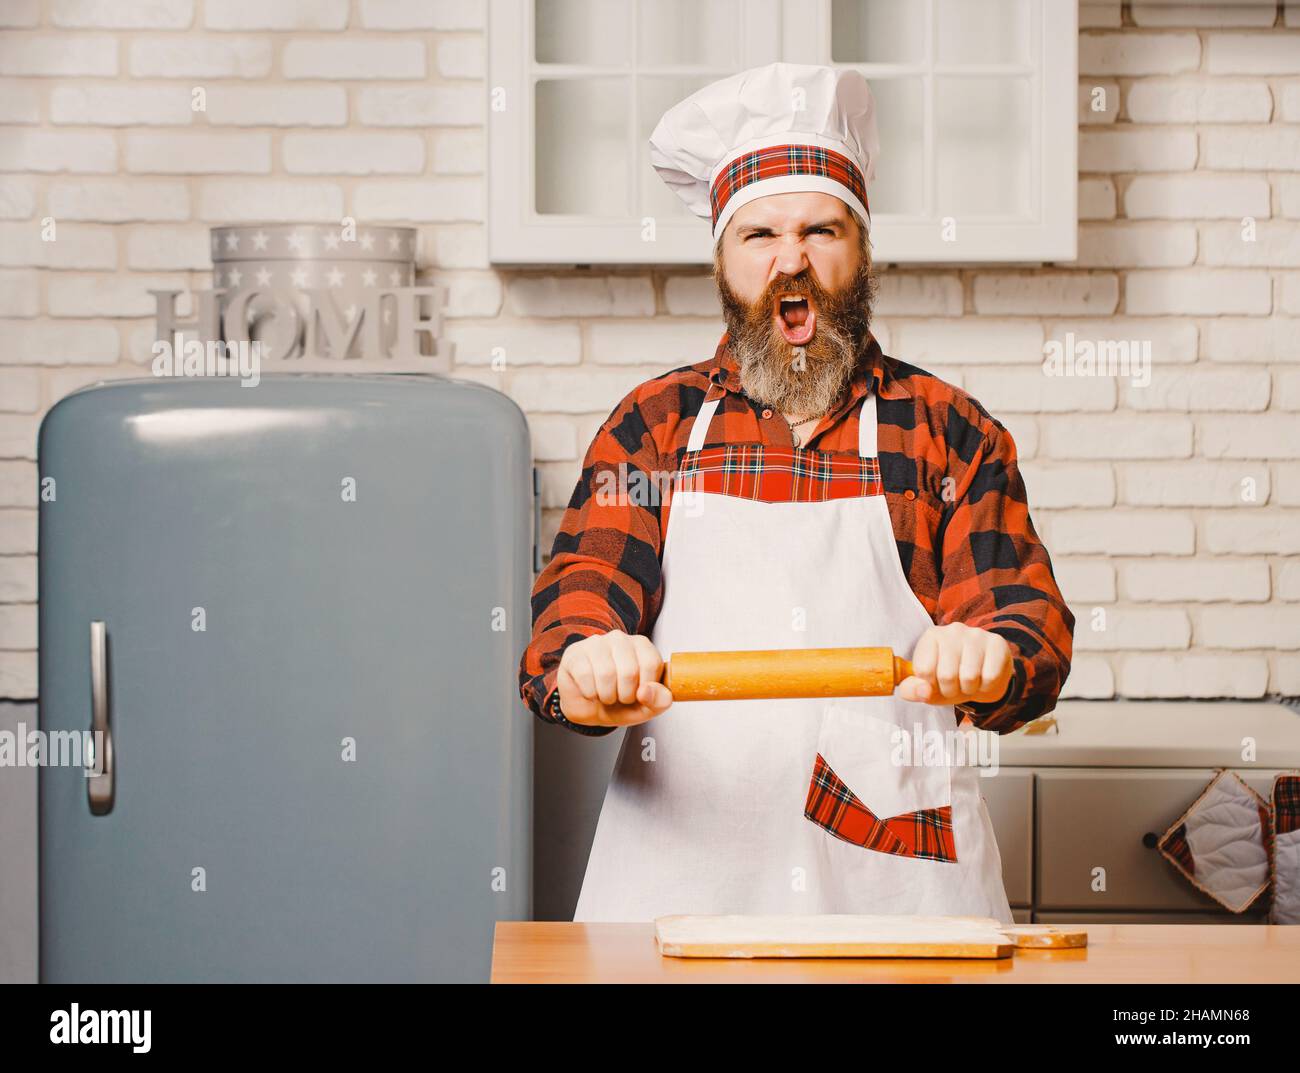 Angry chef bakers man raising rolling pin threateningly in white ...